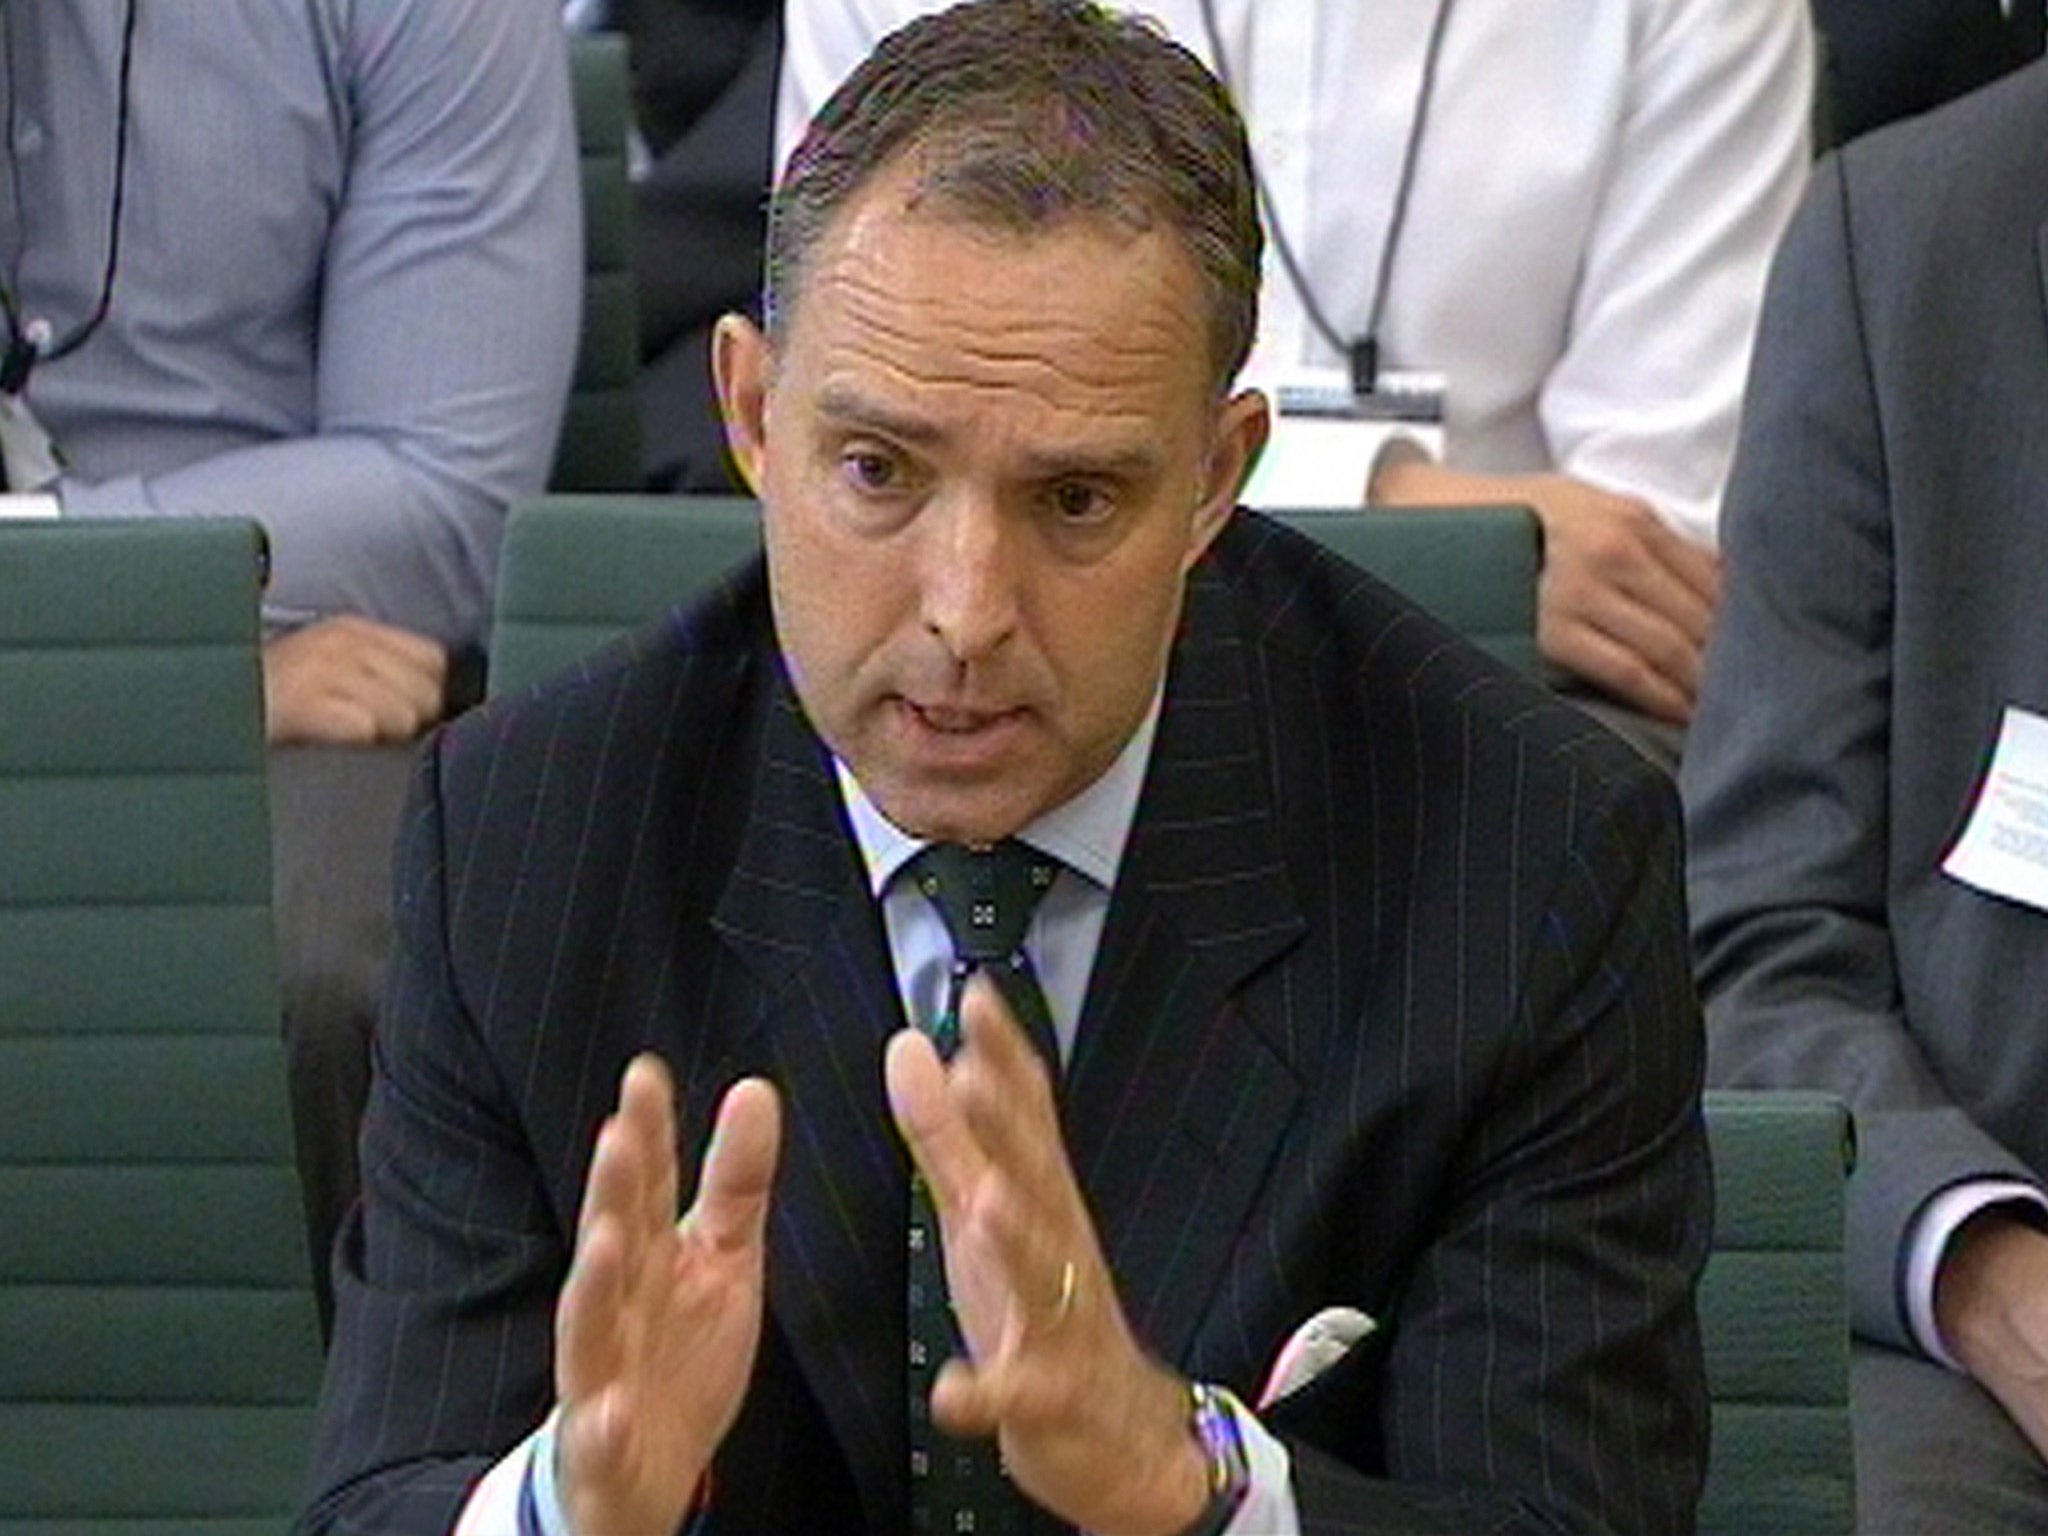 Home Office Permanent secretary Mark Sedwill appears in front of the Home Affairs Select Committee at the House of Commons